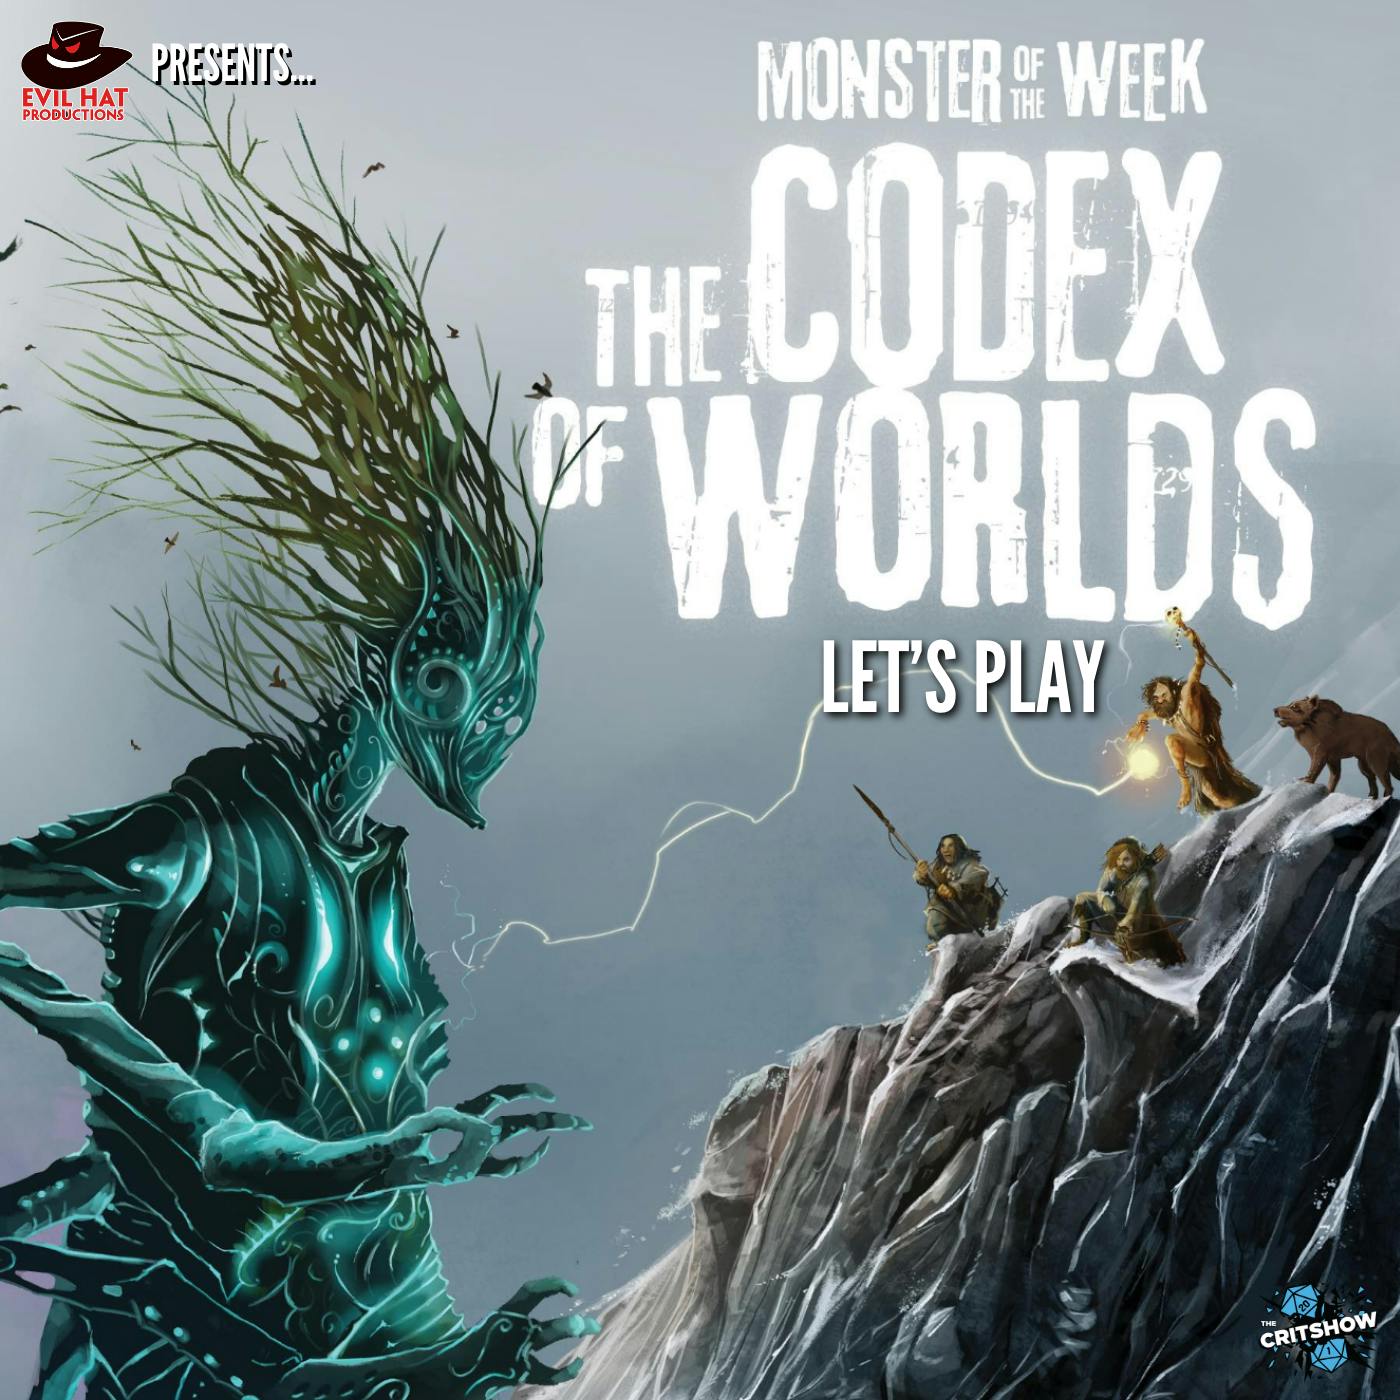 The Critshow: The Codex of Worlds (Pt 4)